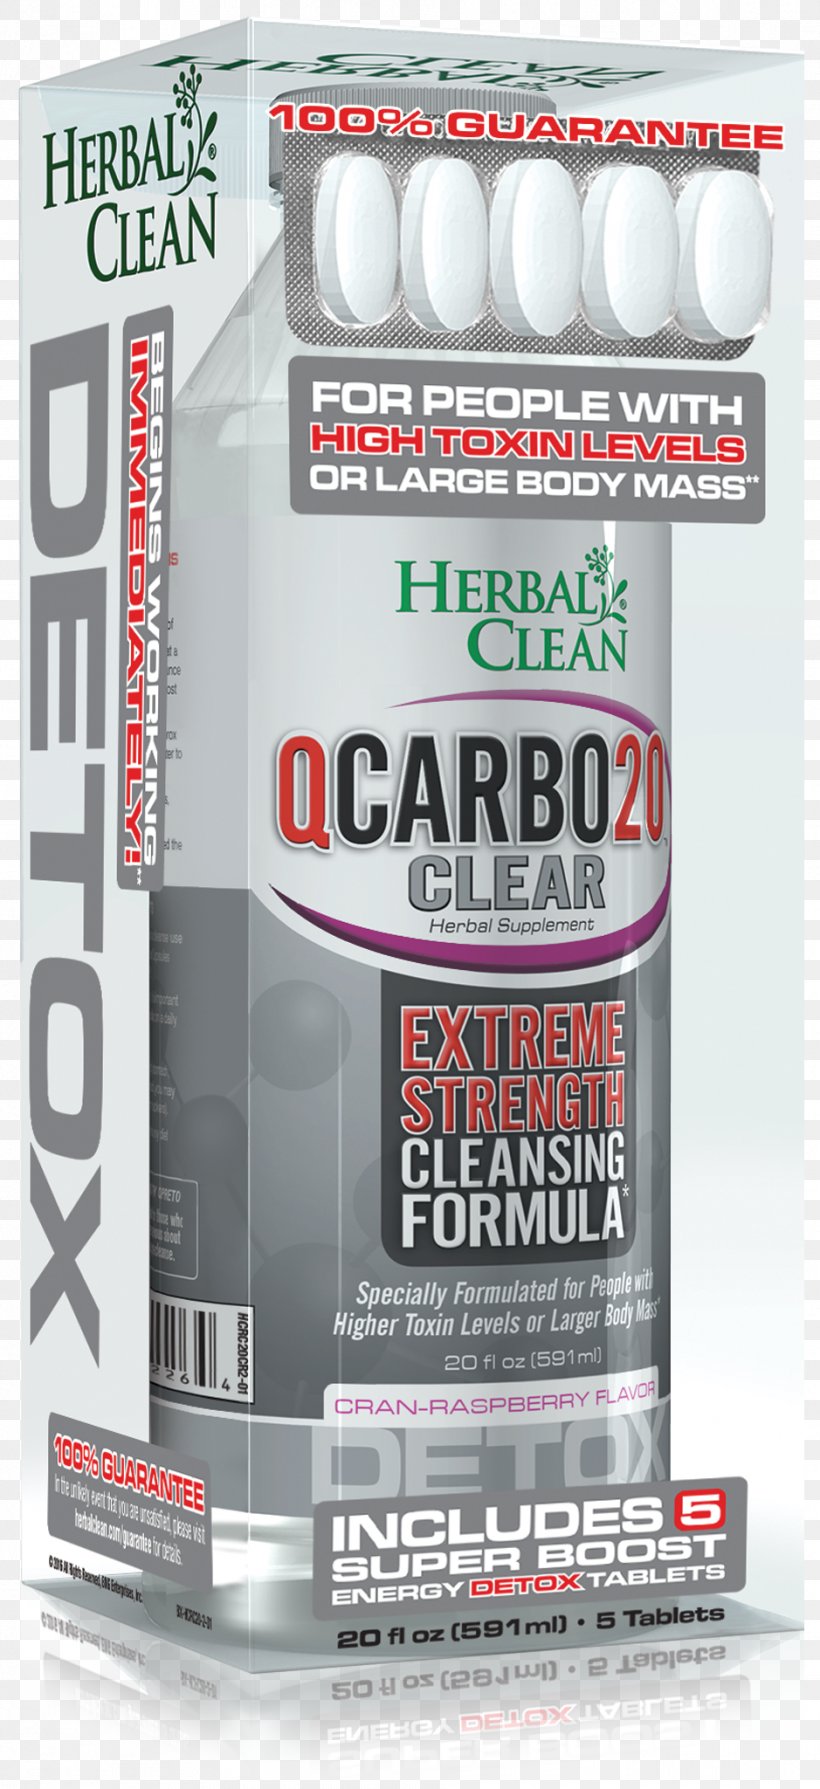 HERBAL CLEAN DETOX Q Carbo Liquid Grape 16 OZ BNG Enterprises Herbal Clean QCarbo20 Clear Extreme Strength Cleansing Formula Lemon-Lime Flavor Detoxification Drink Cleanser, PNG, 939x2049px, Detoxification, Brand, Cleanser, Drink, Extract Download Free